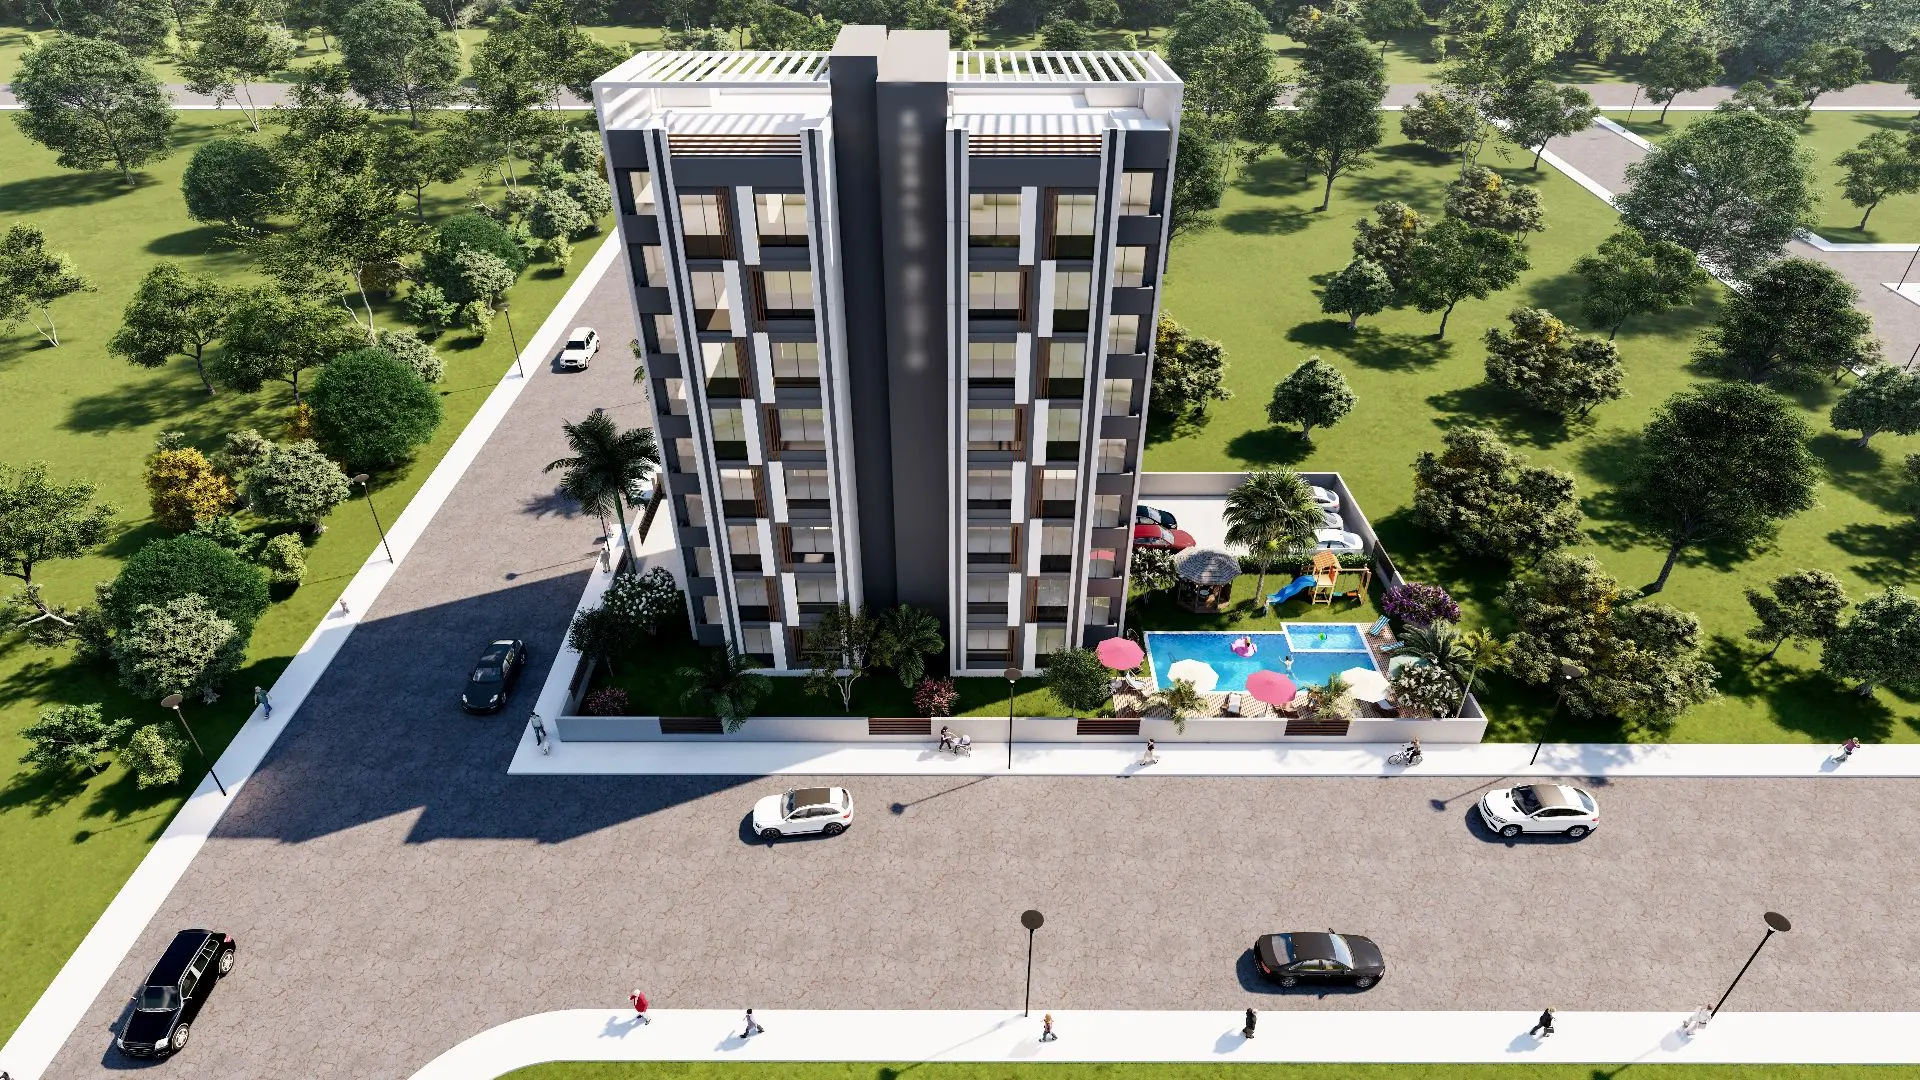 NEW RESIDENTIAL PROJECT IN MERSIN DISTRICT